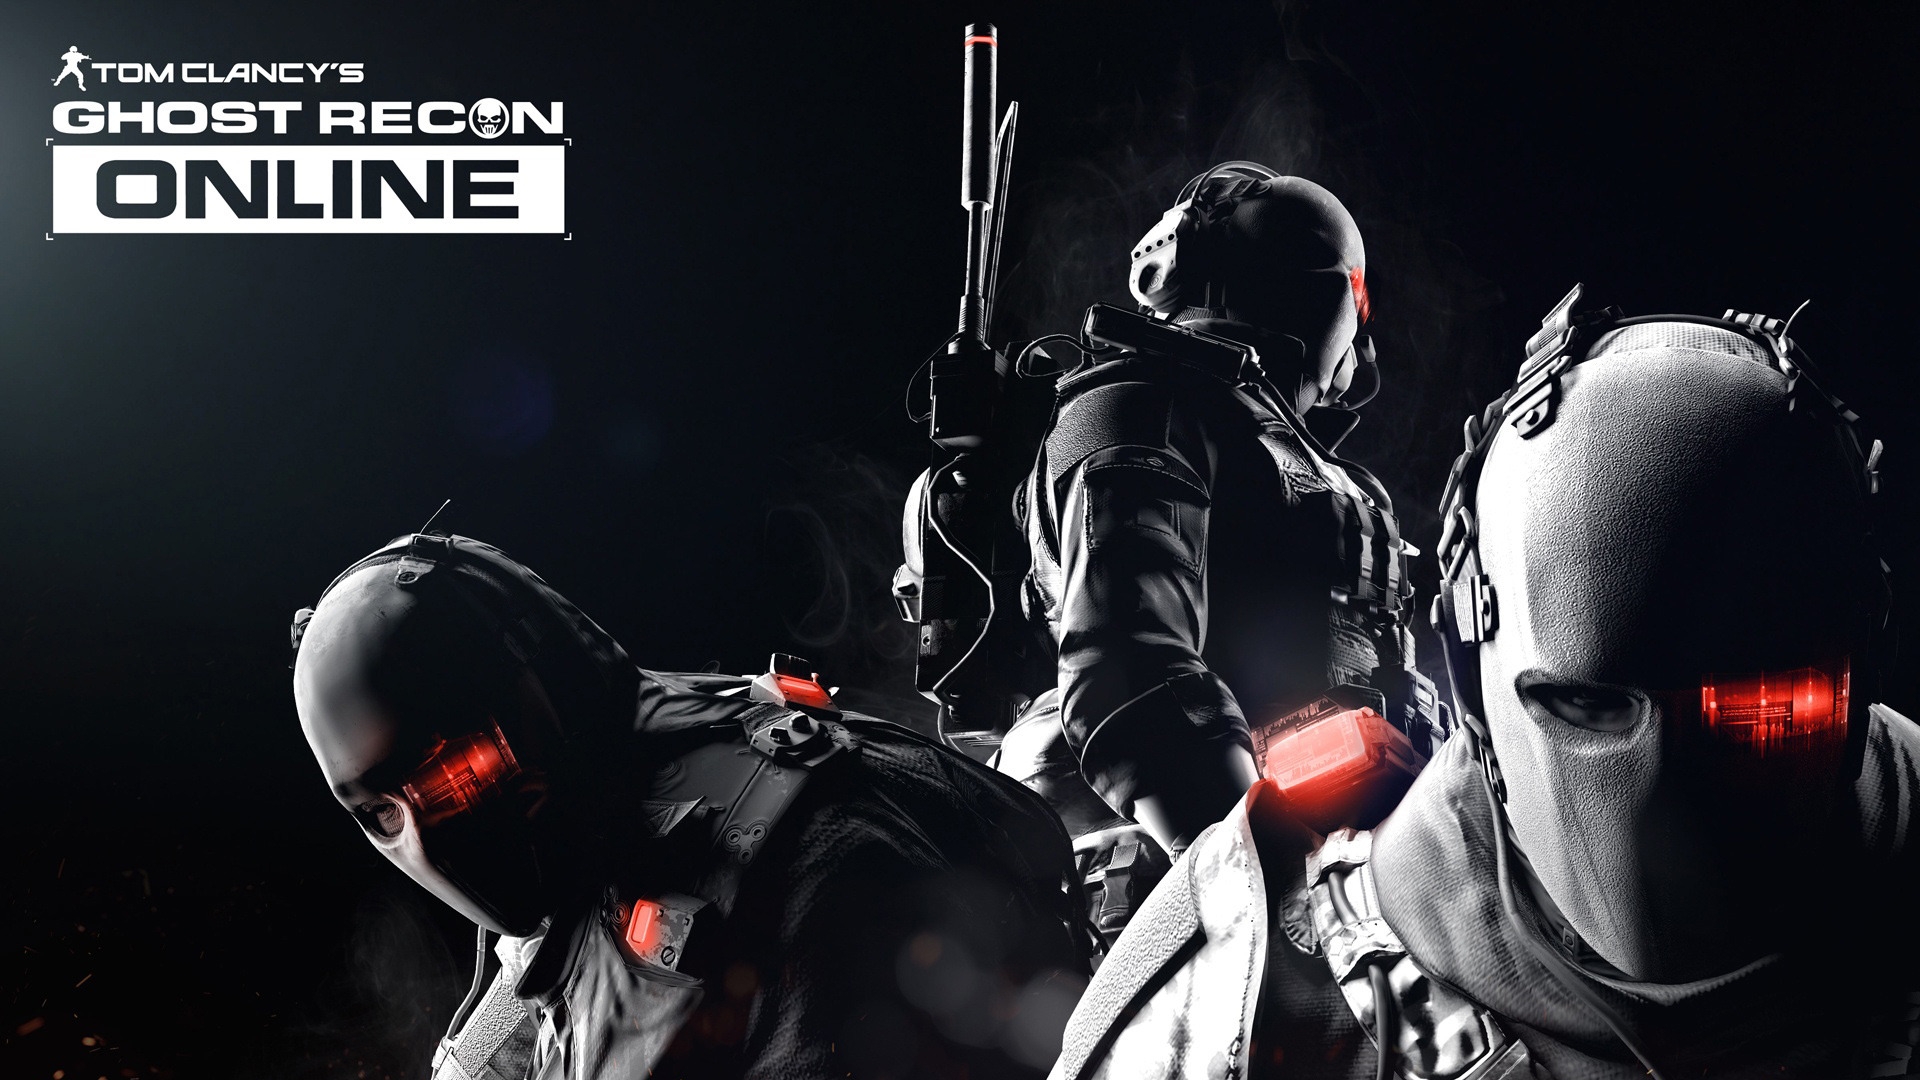 Tom Clancys Ghost Recon Online for 1920 x 1080 HDTV 1080p resolution